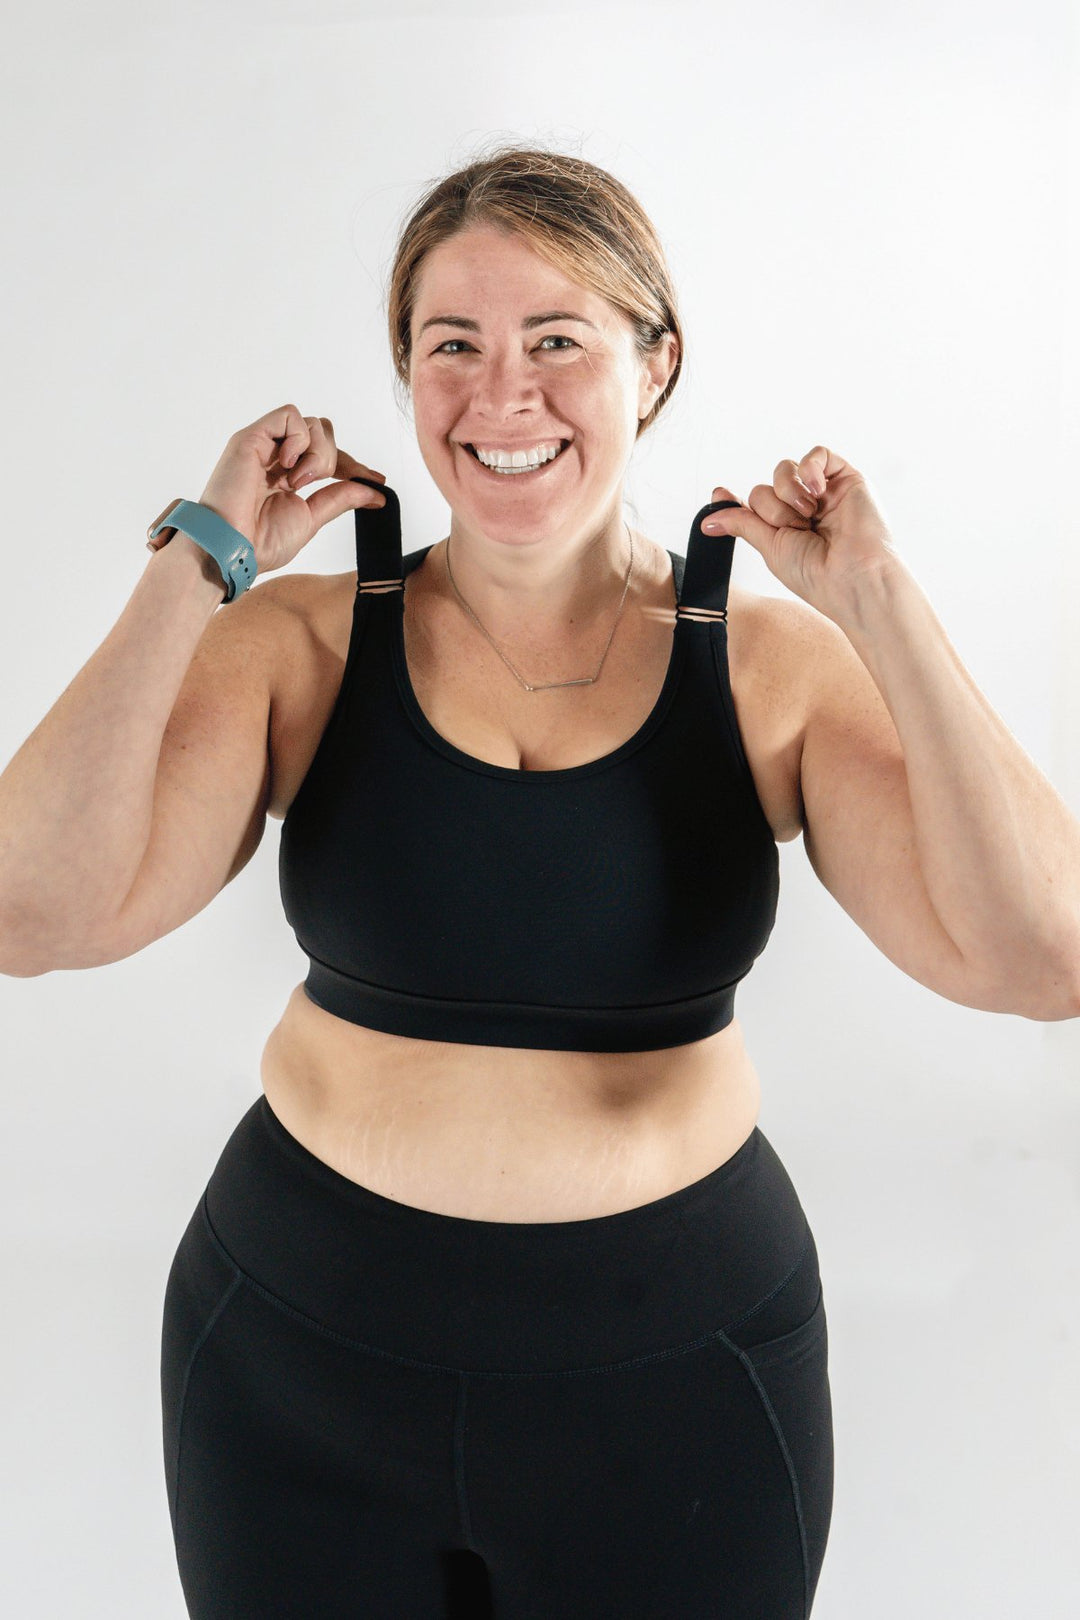 Have a laugh with Booko: Trapped In My Sports Bra